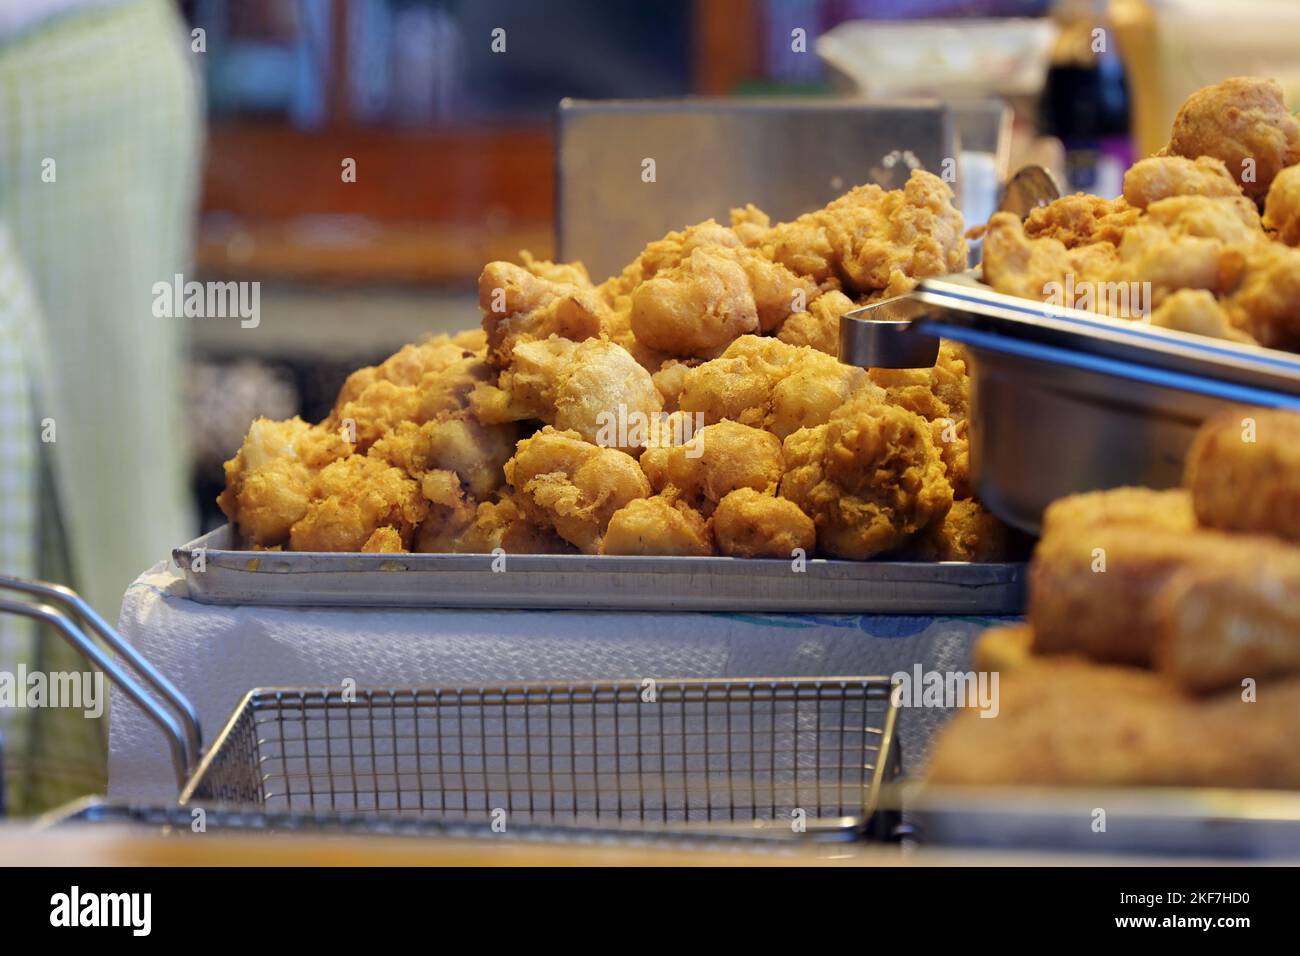 Deep fried sweet pastry, common carnival fair snack offered in stalls on markets around Christmas in Germany, selected focus, narrow depth of field Stock Photo